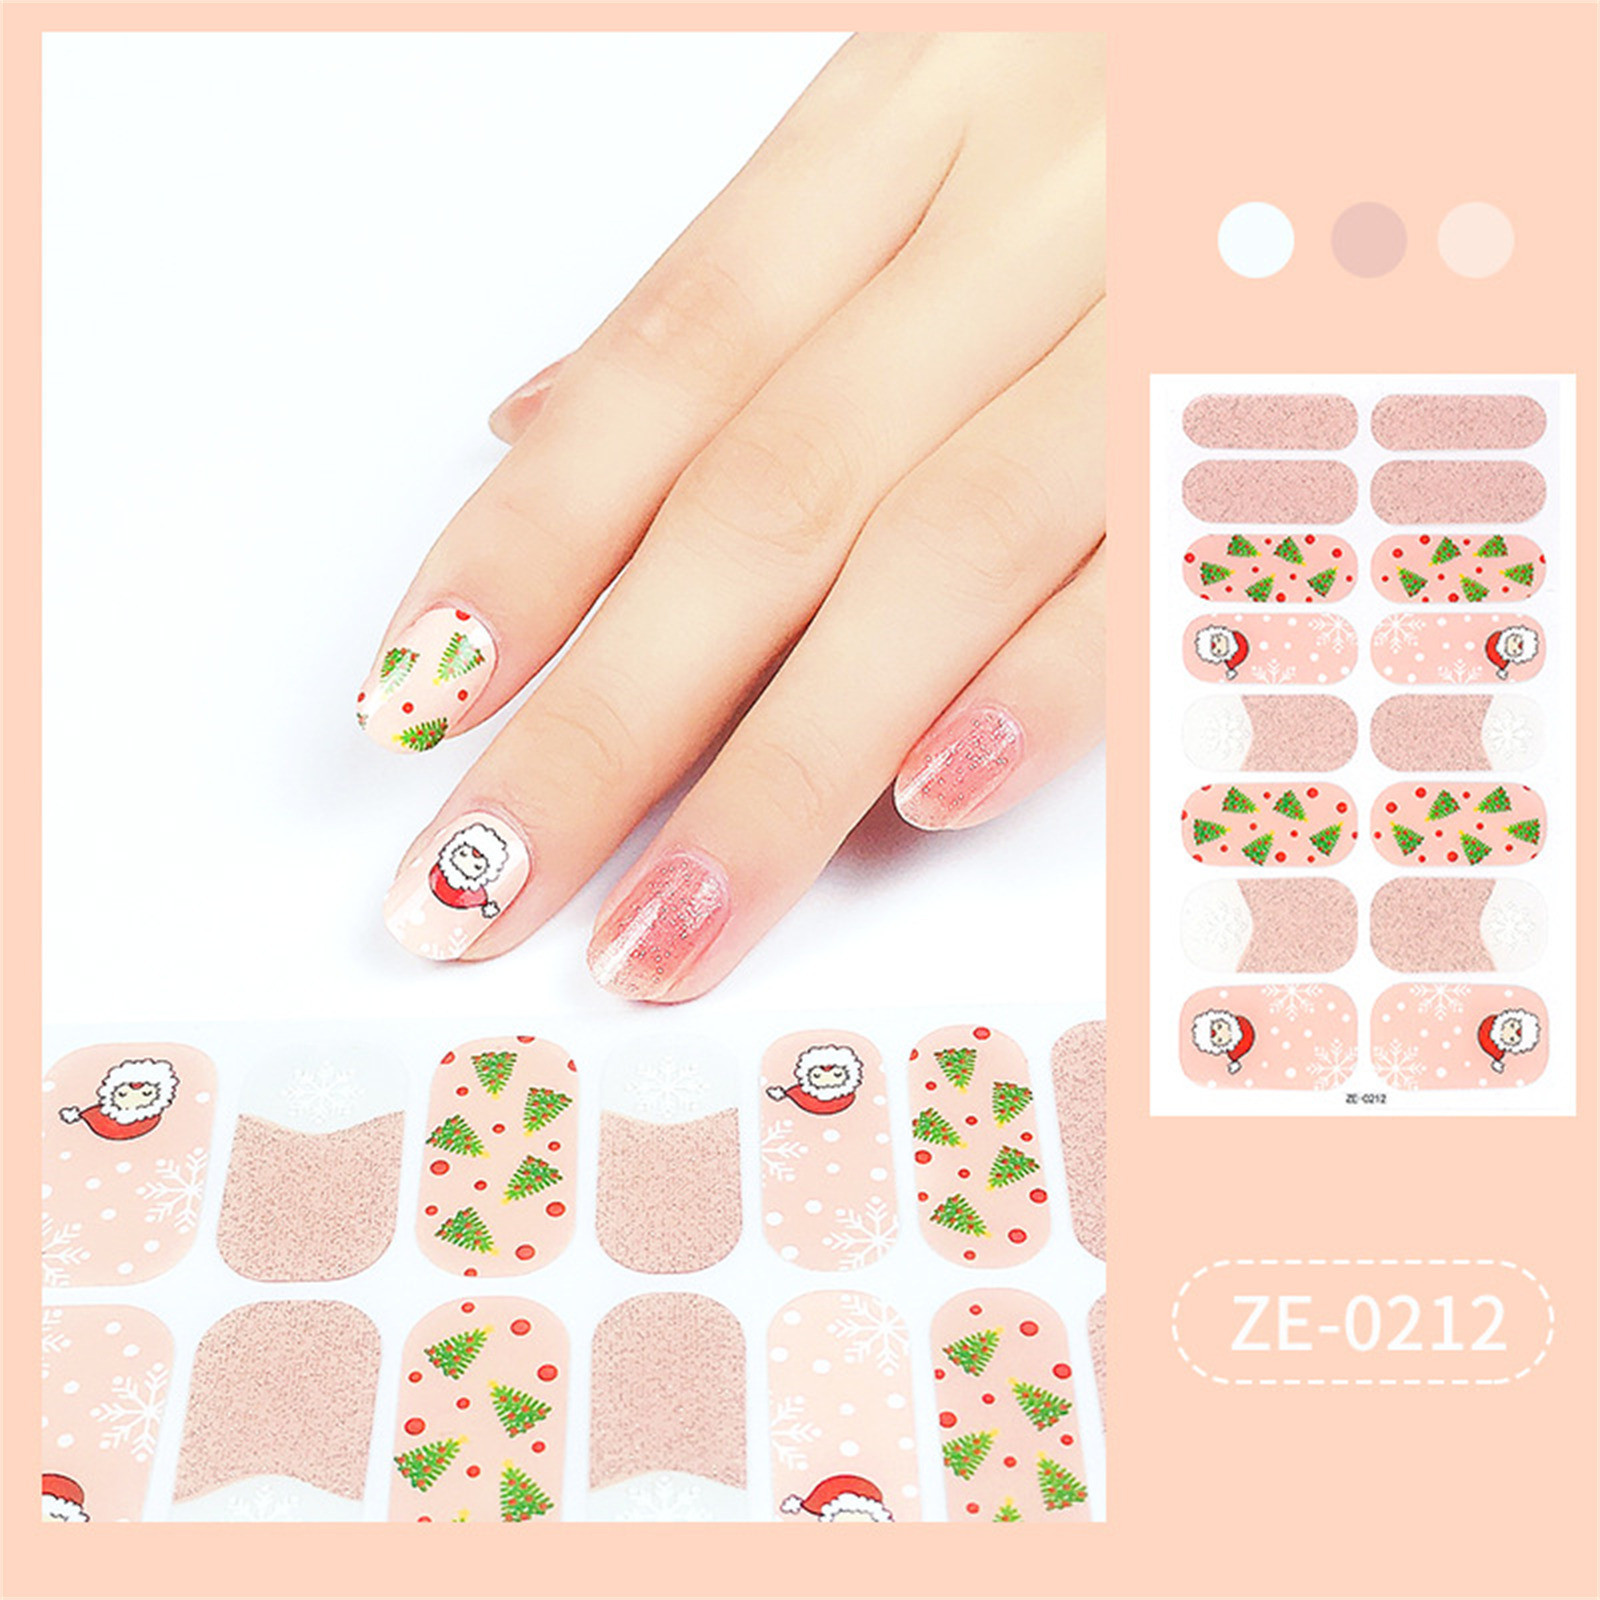 Tejiojio HoliDay Home Trends 16 Strips Semi-Cured Gel Nail Stickers Set for UVlamp Designer 3 Dimensions Nail Polish Fashion Gel Nail Art Stickers - image 1 of 2